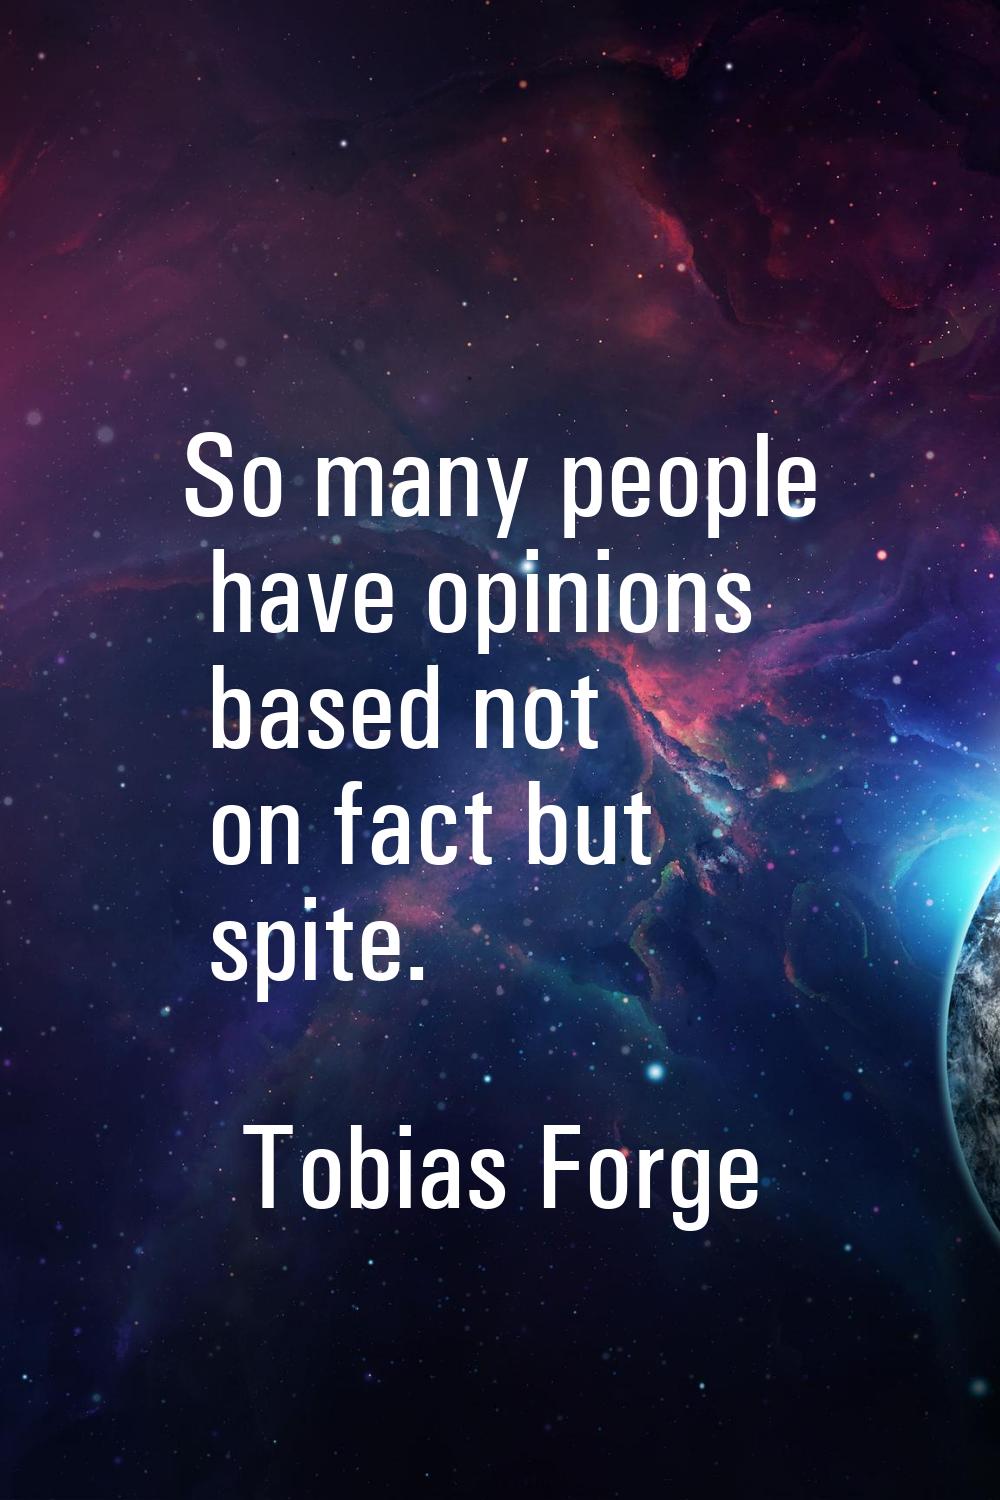 So many people have opinions based not on fact but spite.